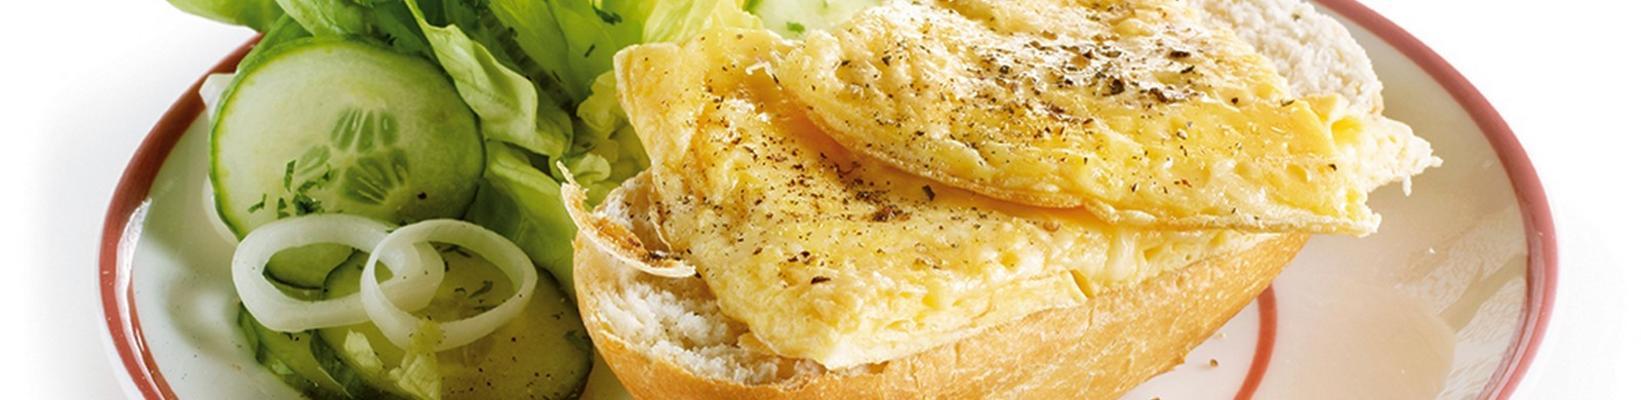 cheese omelette with cabbage lettuce and baguette